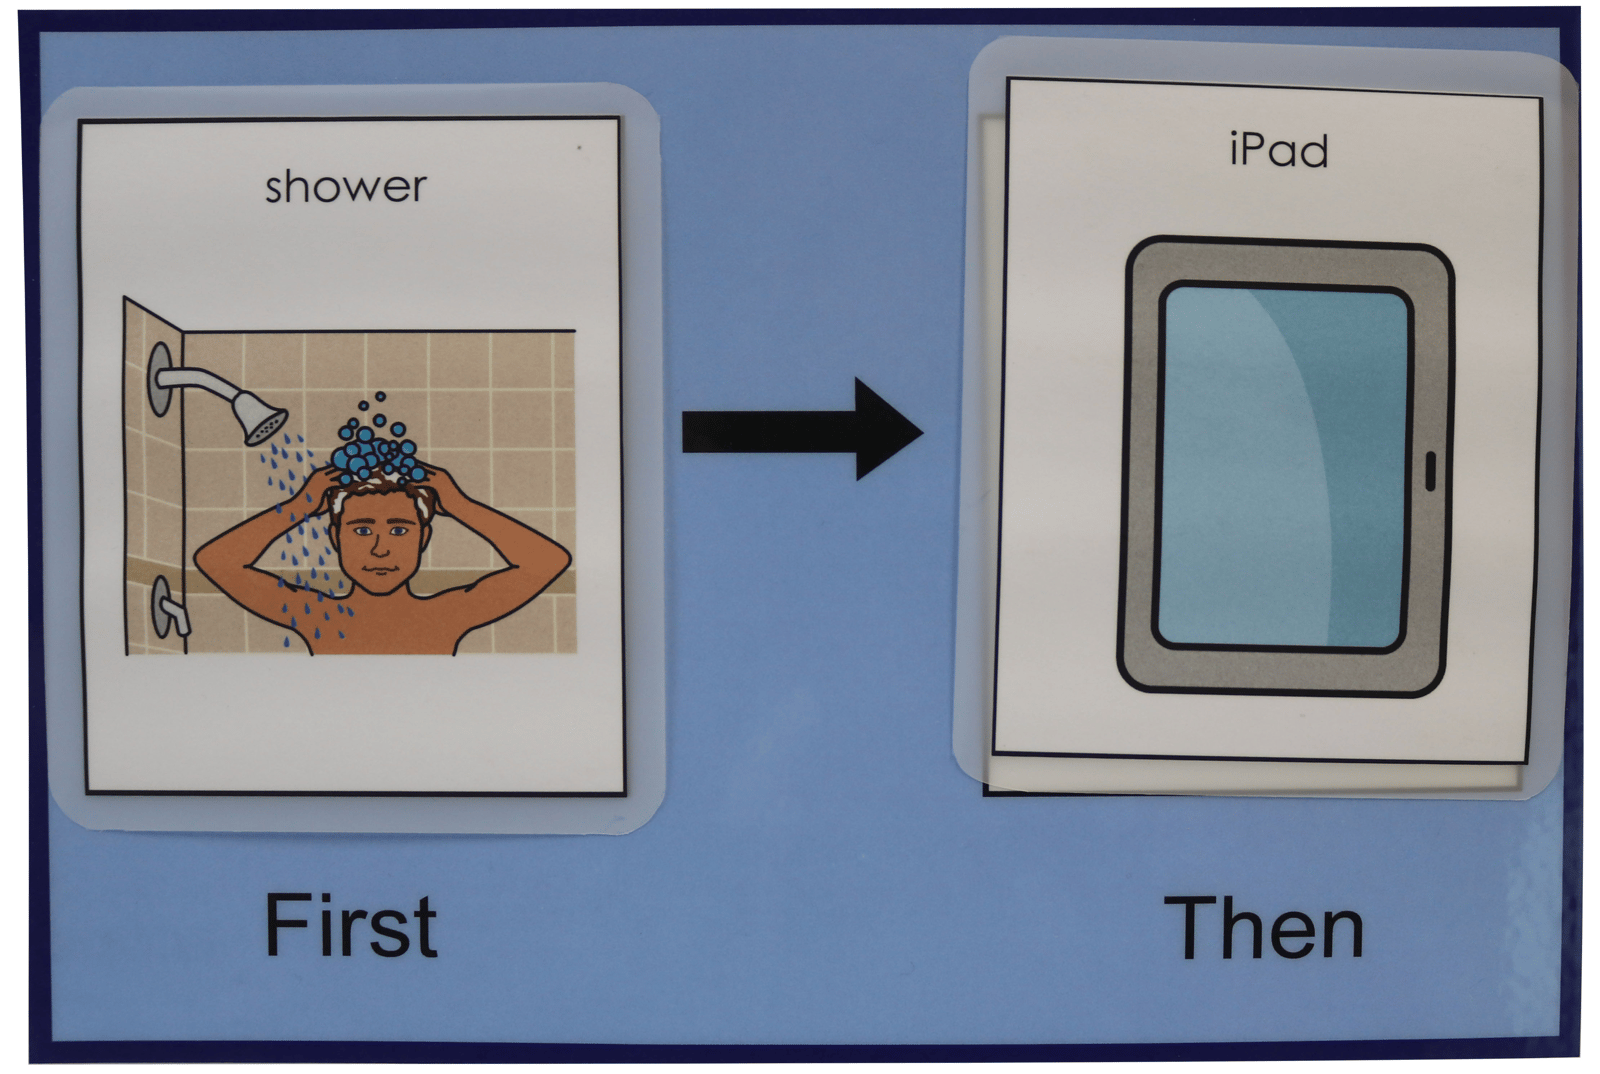 A page showing Shower first and iPad later